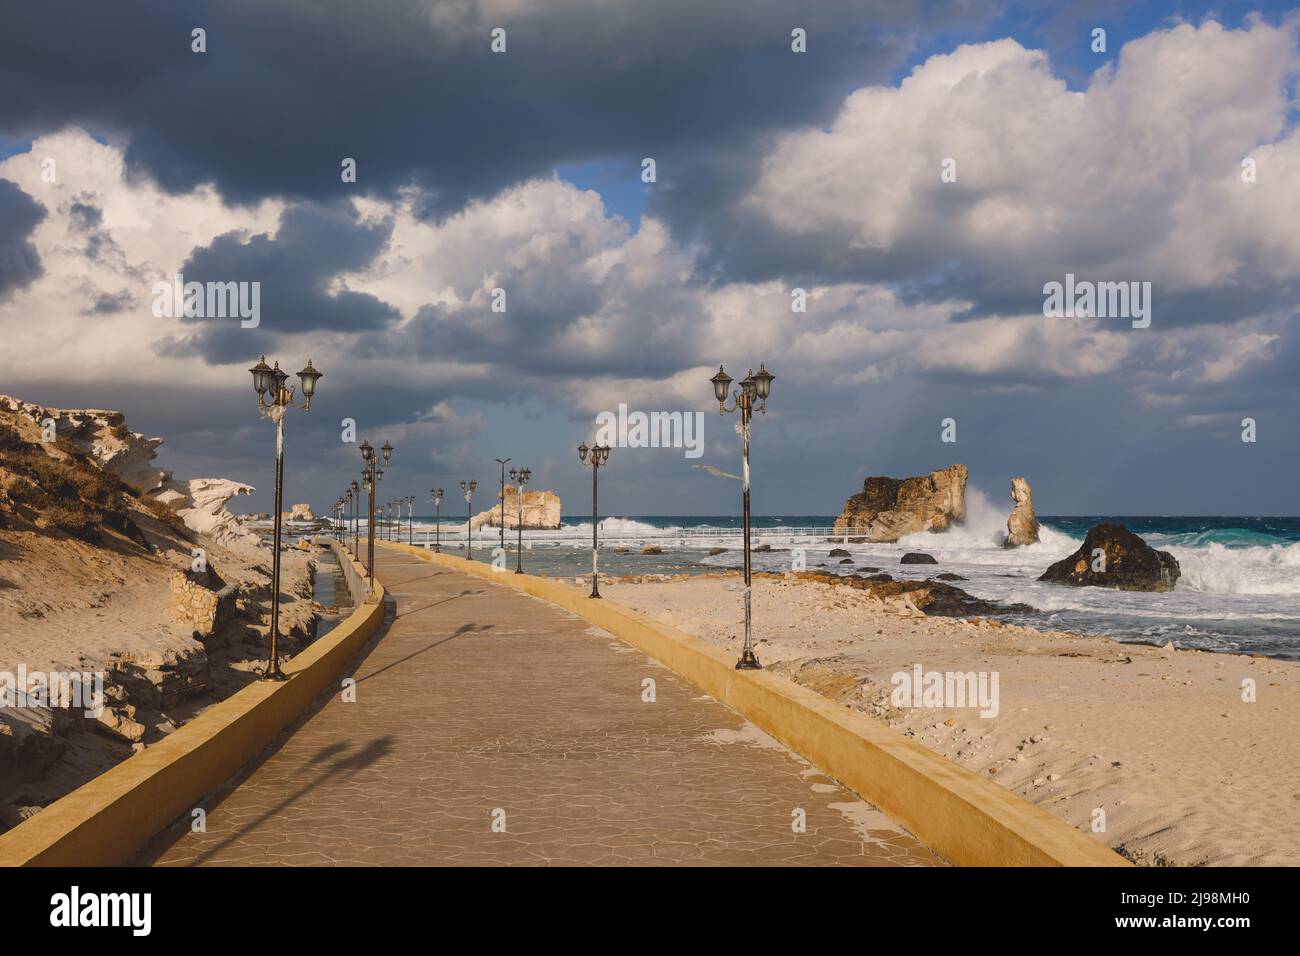 Windy and Rocky Coastline of the Mediterranean Sea in the Marsa Matruh city under Blue Cloudy sky with no People around, Egypt Stock Photo